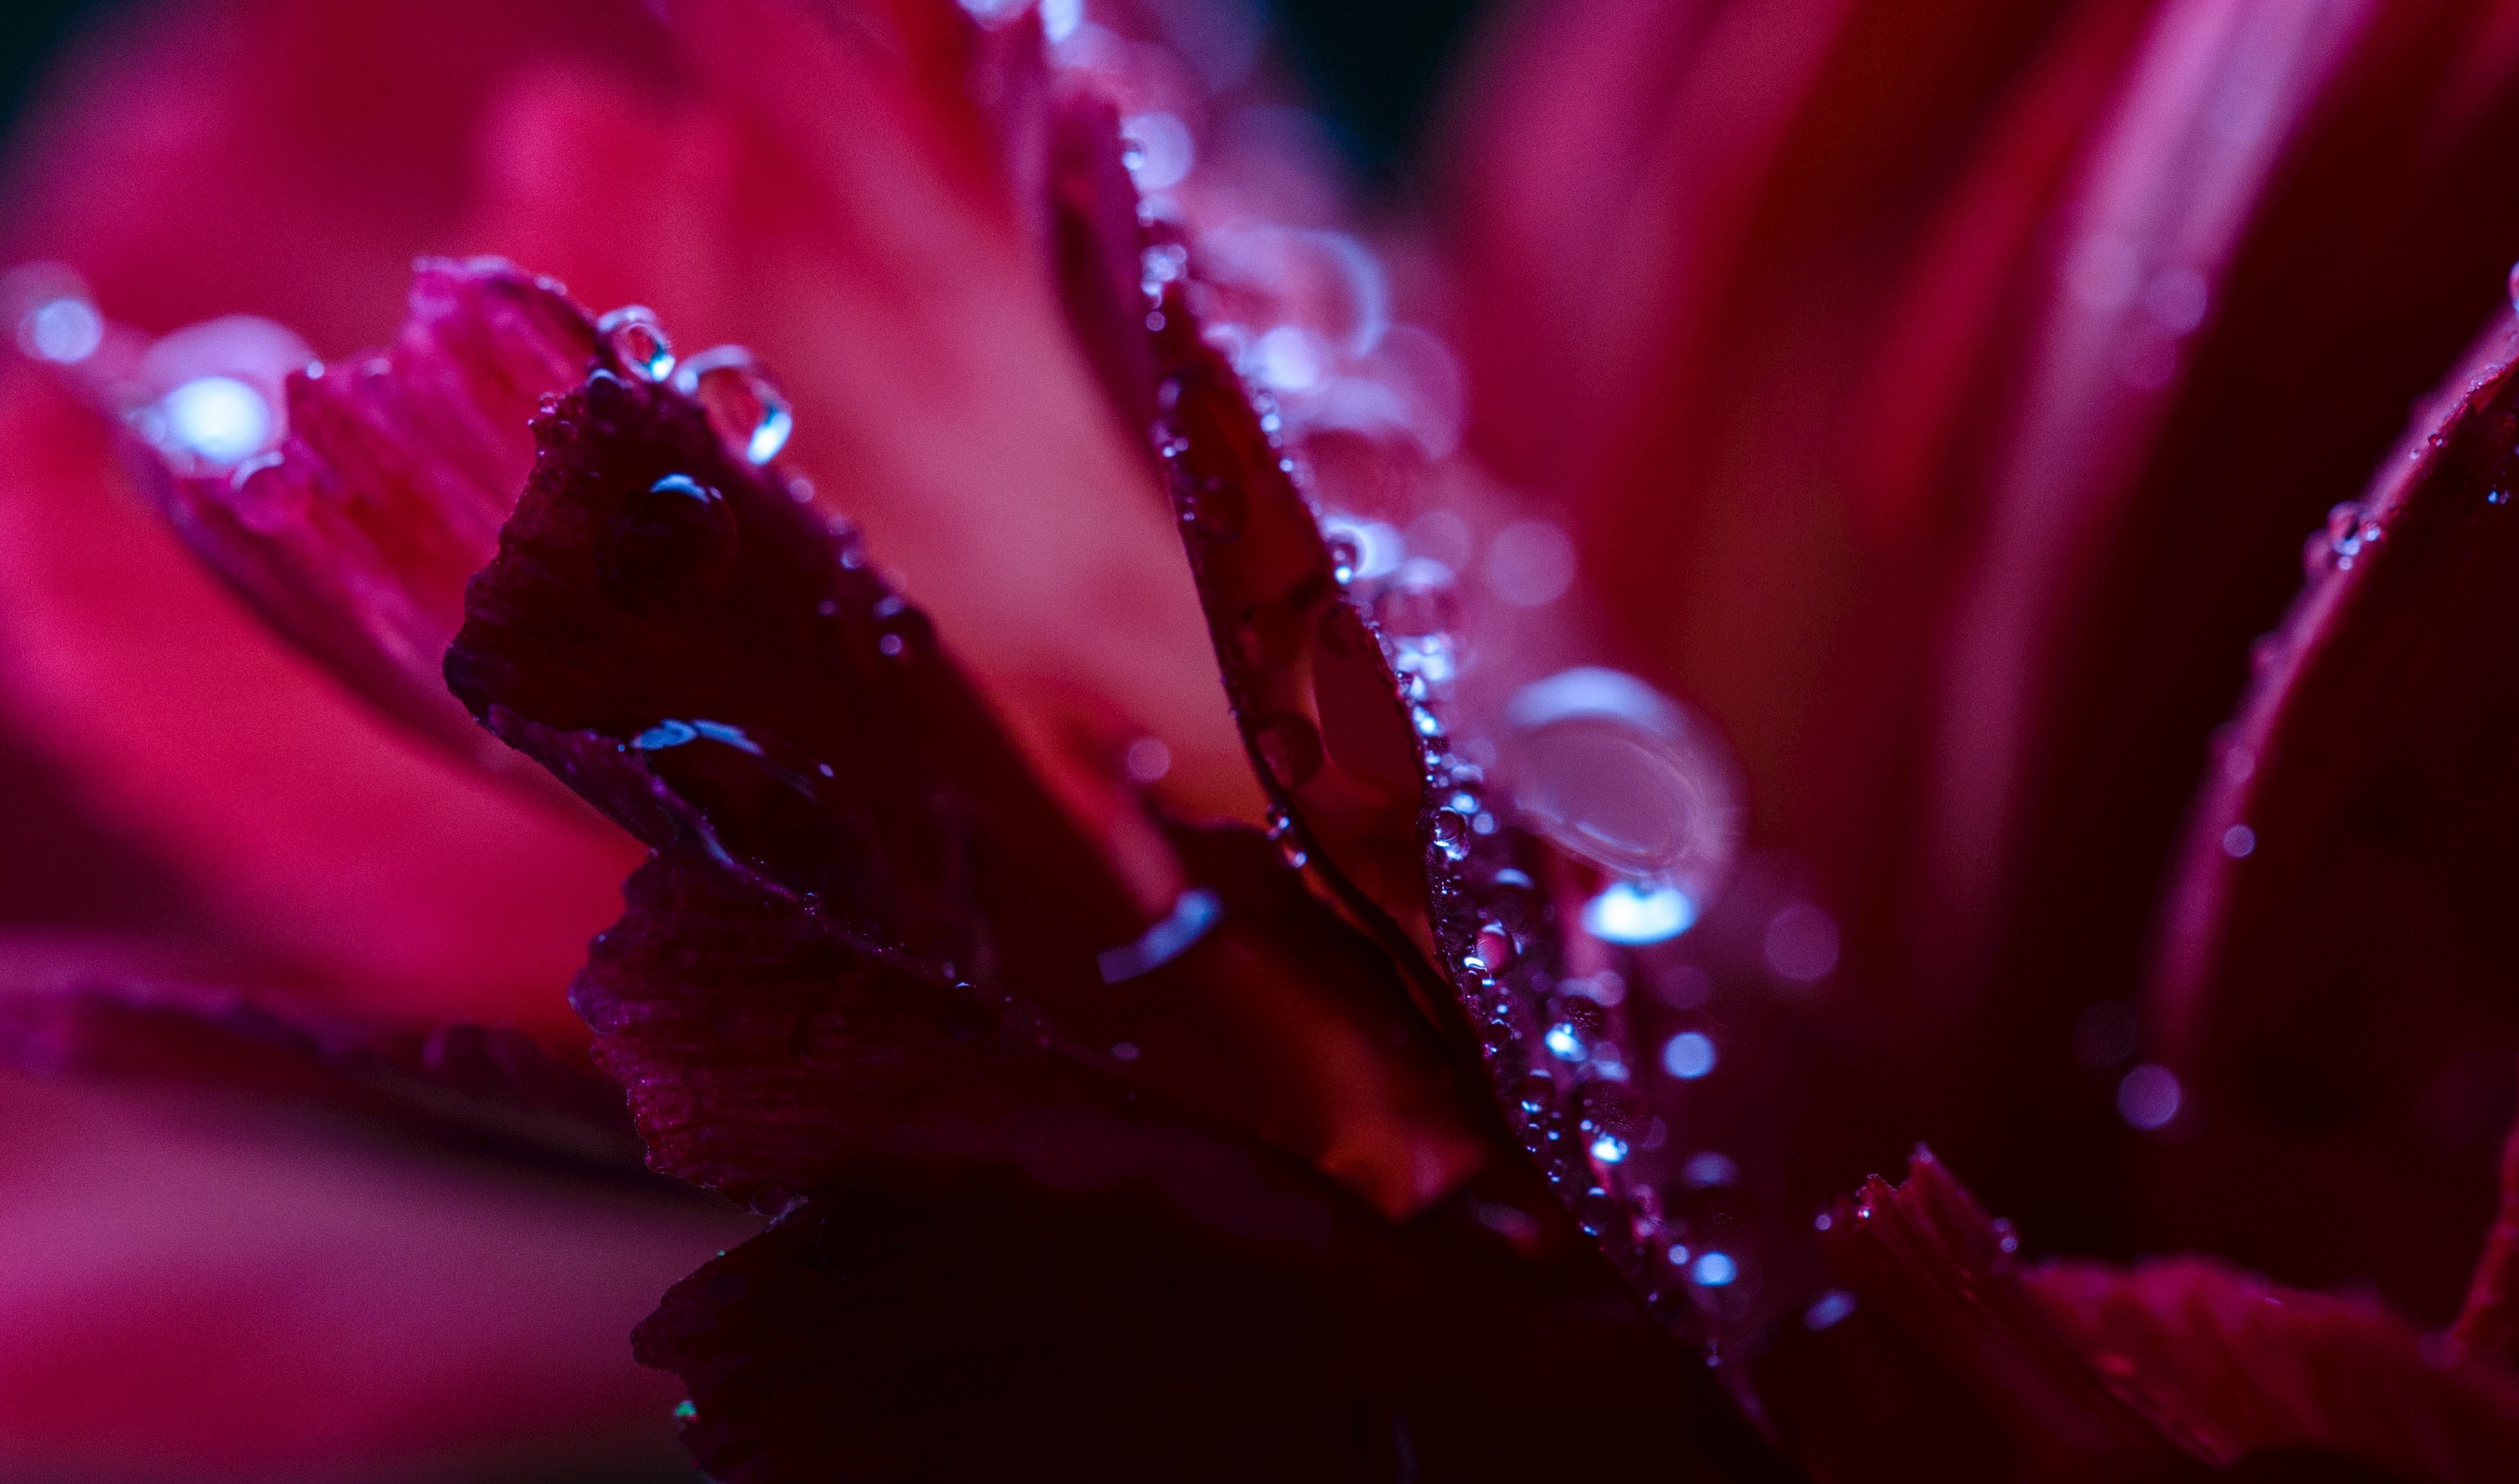 dew on the petals of a vermillion-colored rose